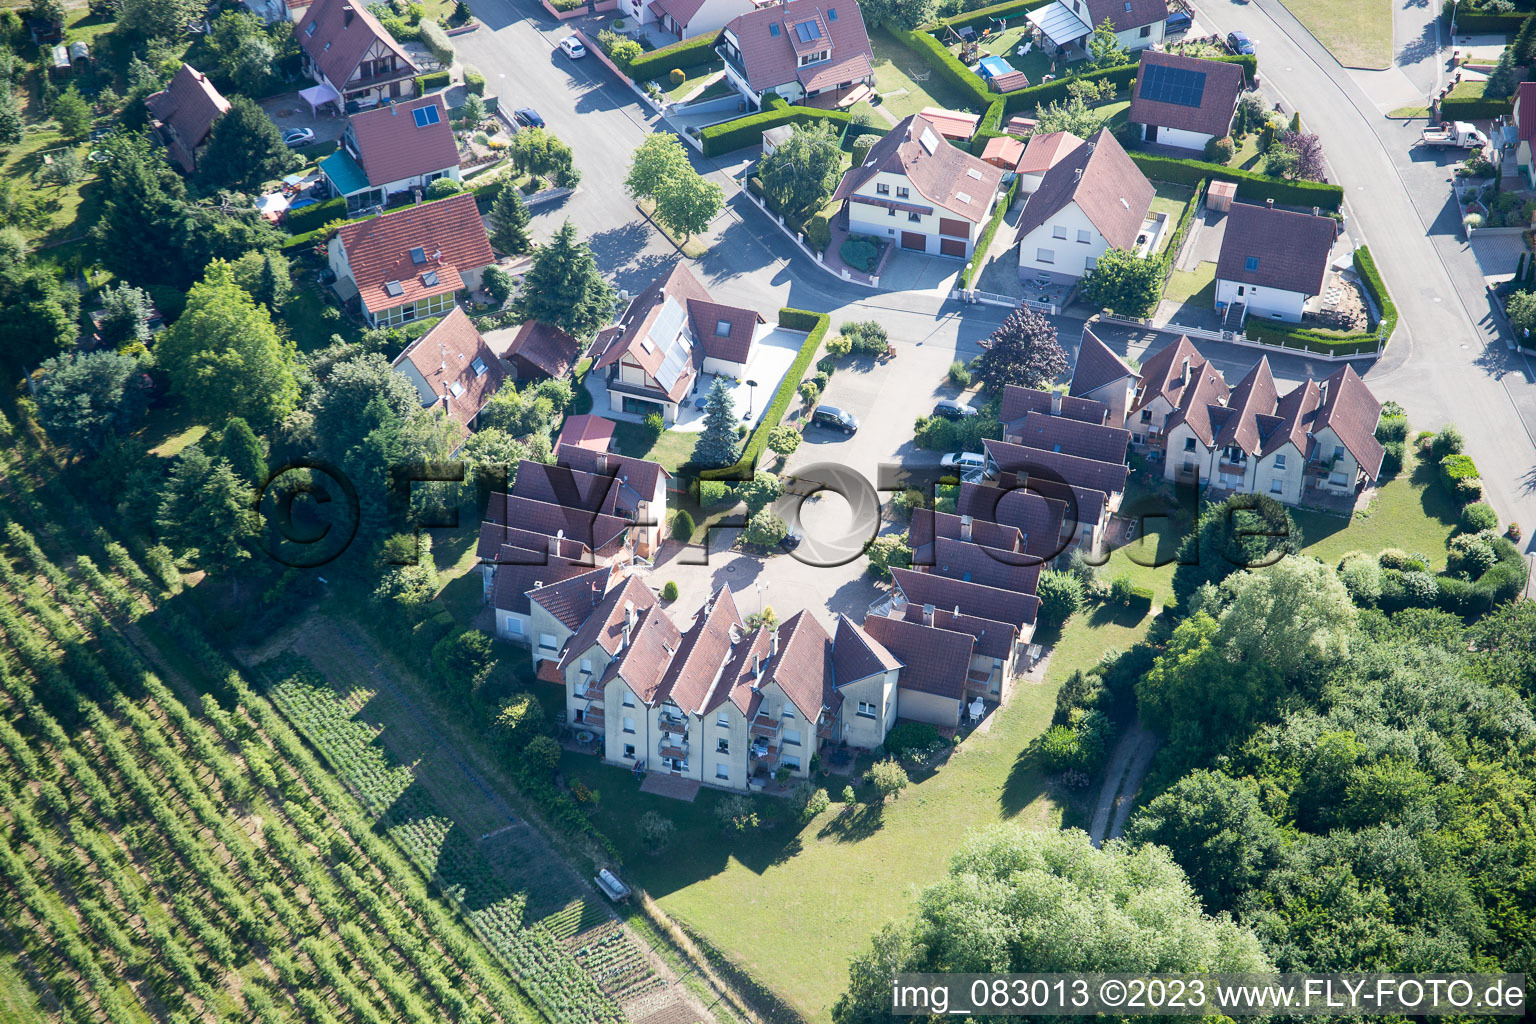 Wissembourg in the state Bas-Rhin, France from above